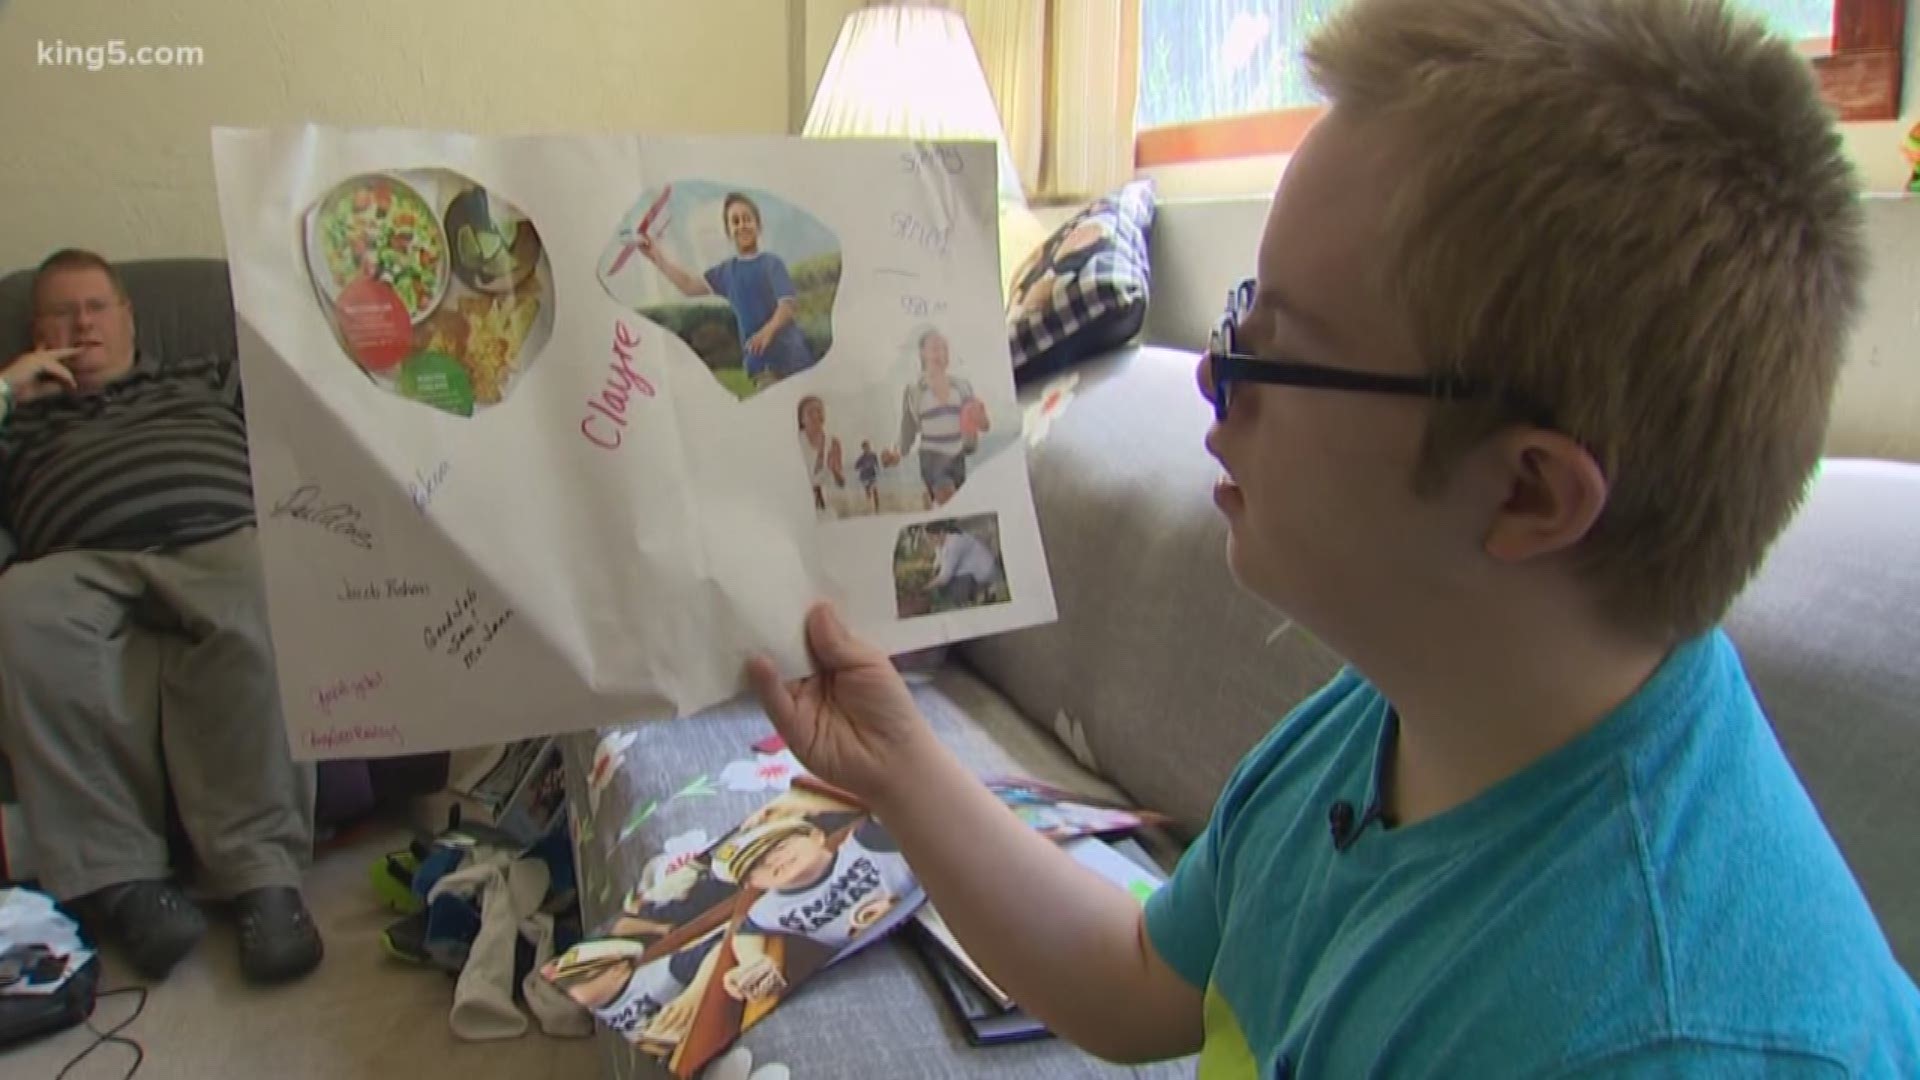 The KING 5 Investigators show us the incredible change that can happen to a child with disabilities with one simple adjustment in their education: giving them a seat in the classroom with the other kids in school. KING 5’s Susannah Frame reports.